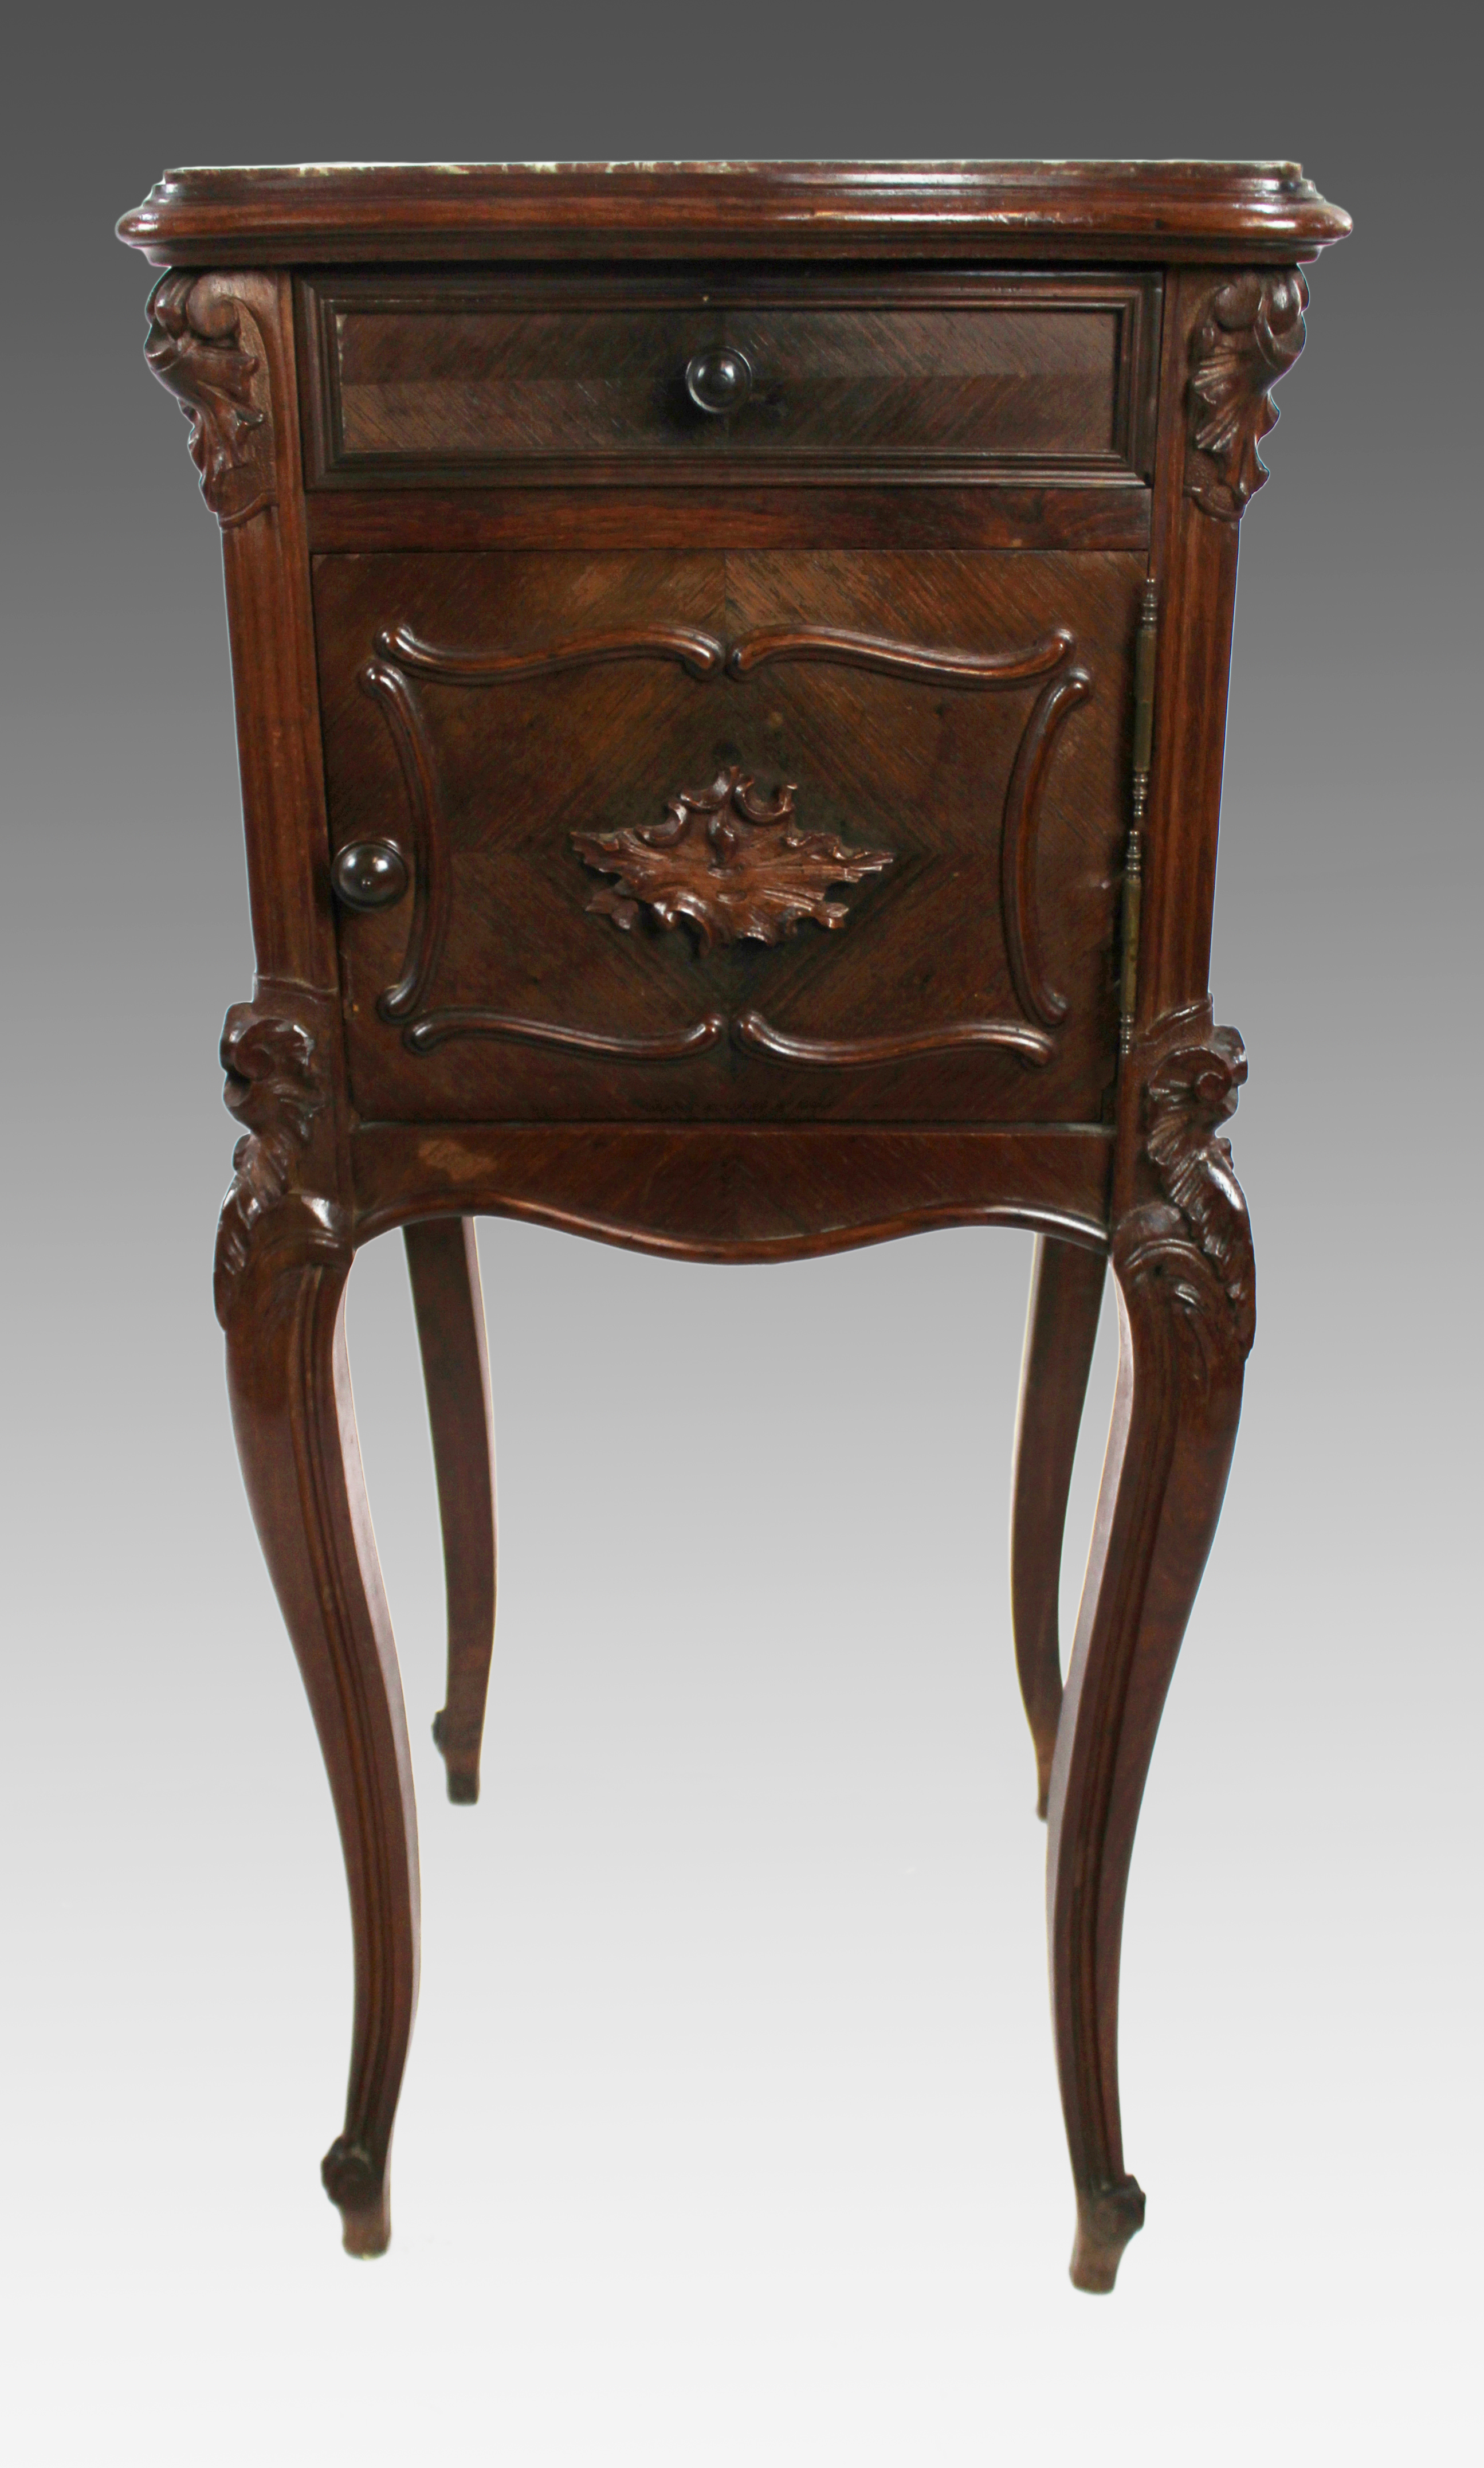 19th c. French Marble Topped Pot Cupboard - Image 3 of 7